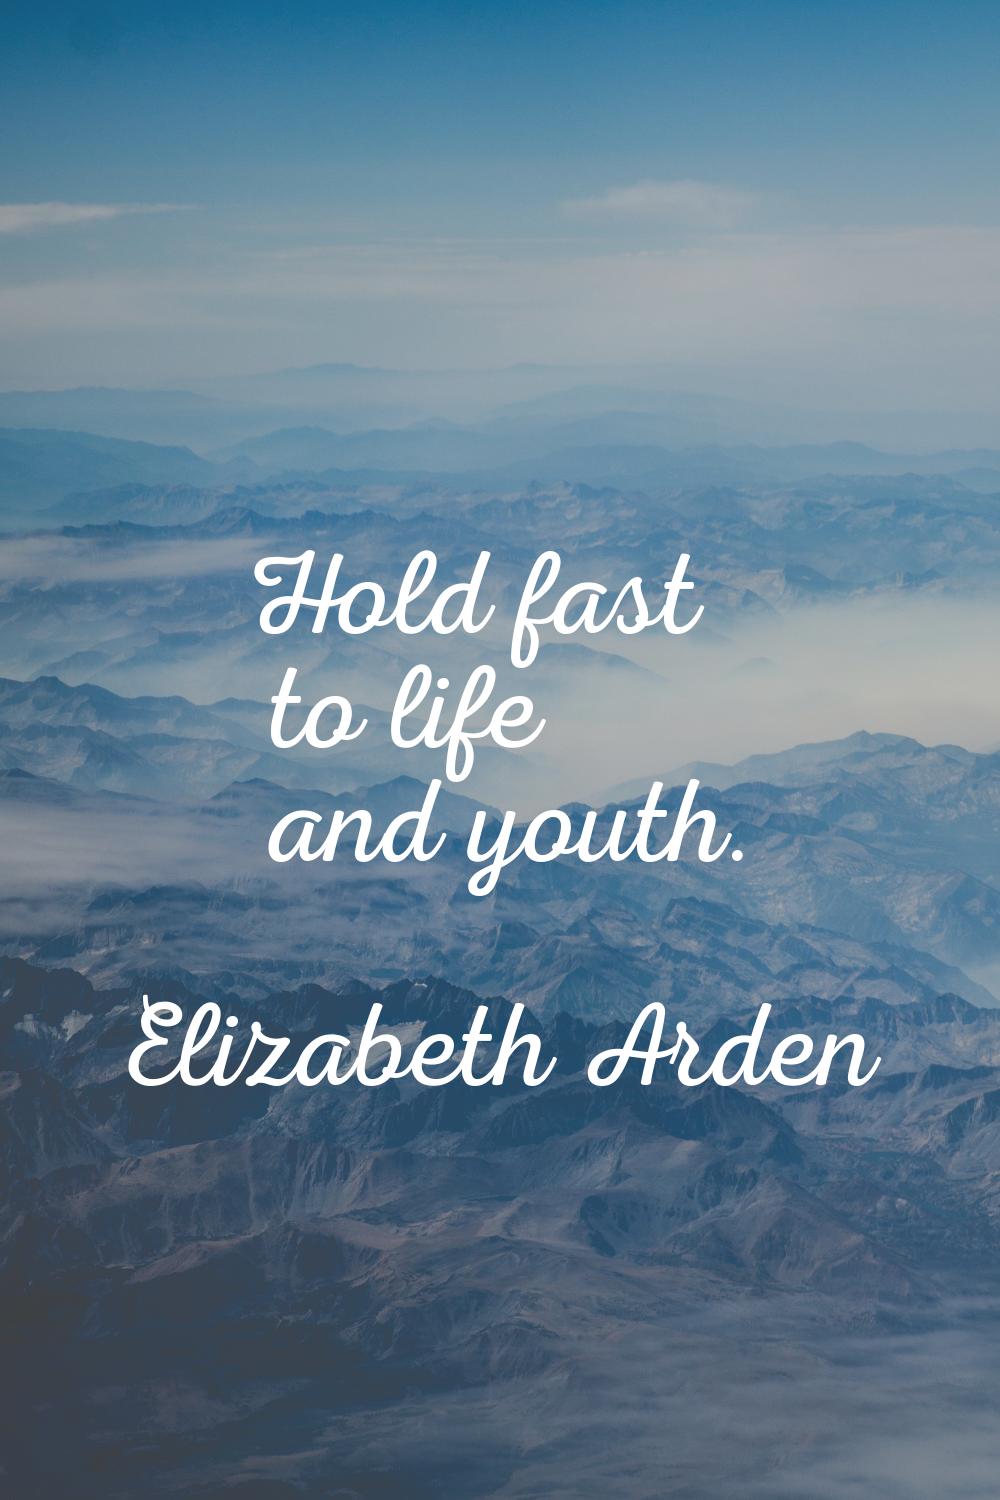 Hold fast to life and youth.